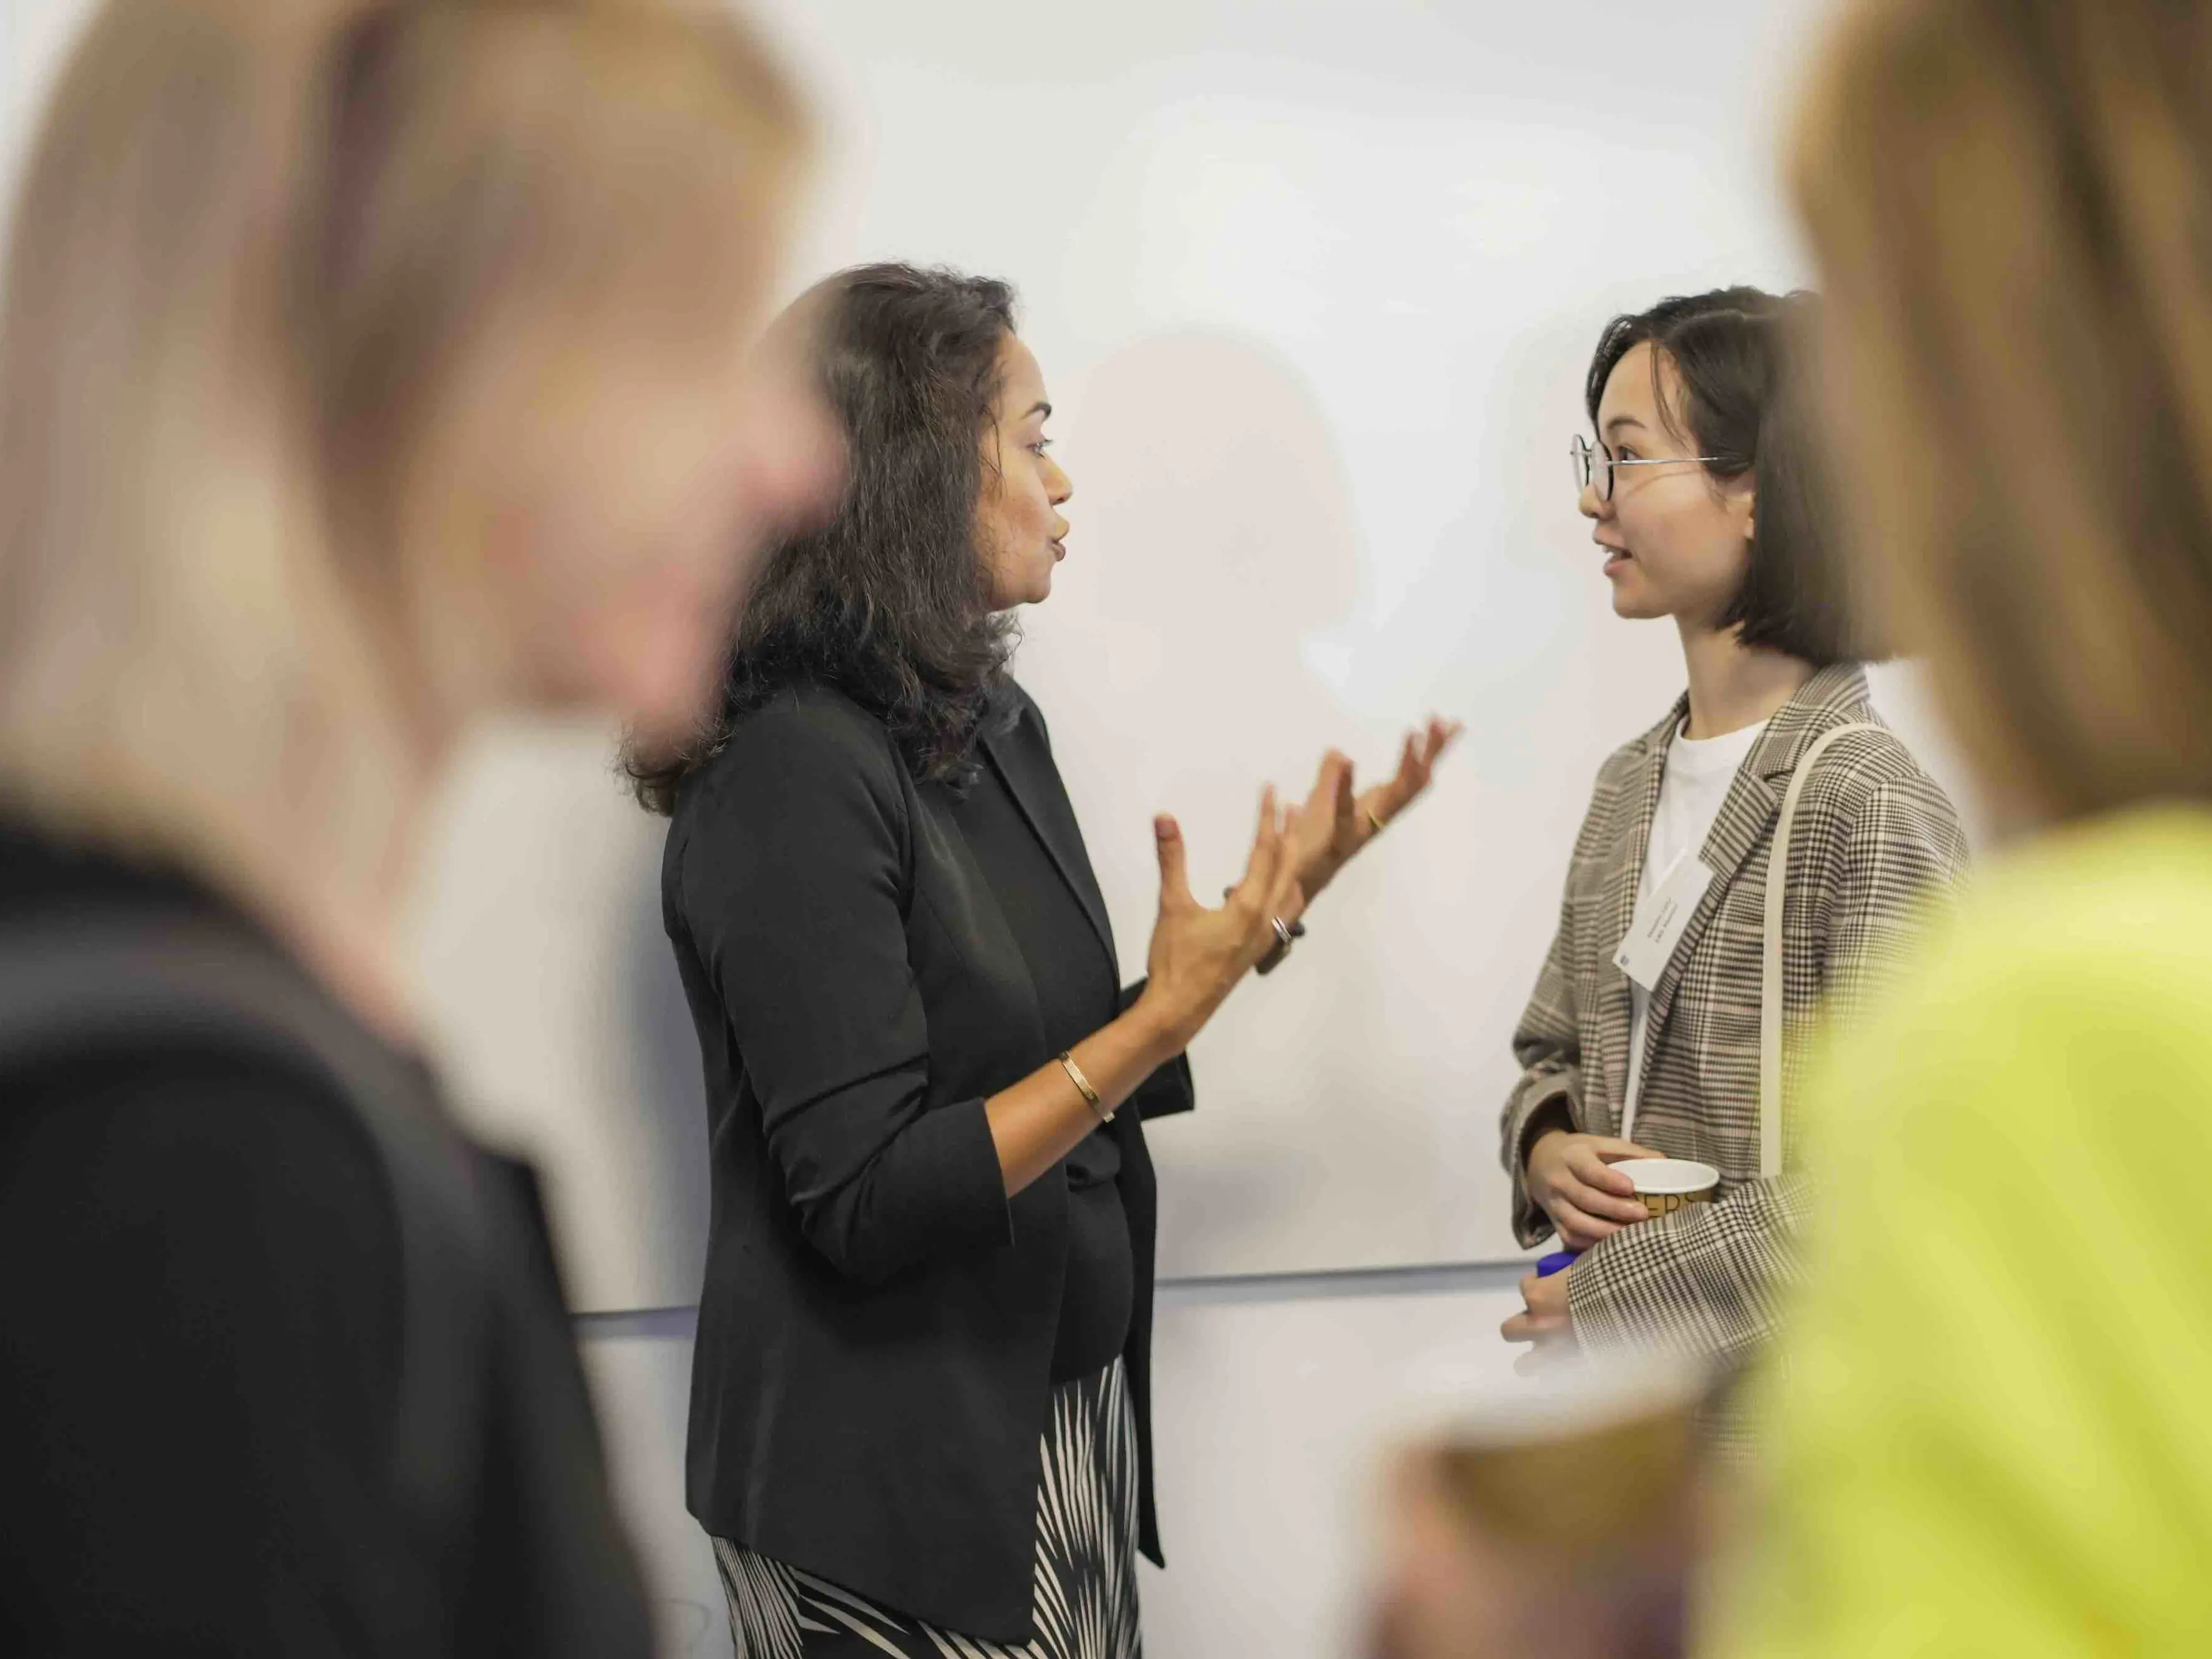 Dr. Poornima Luthra speaking with an audience member at CBS "Building inclusion and belonging in the workplace" event